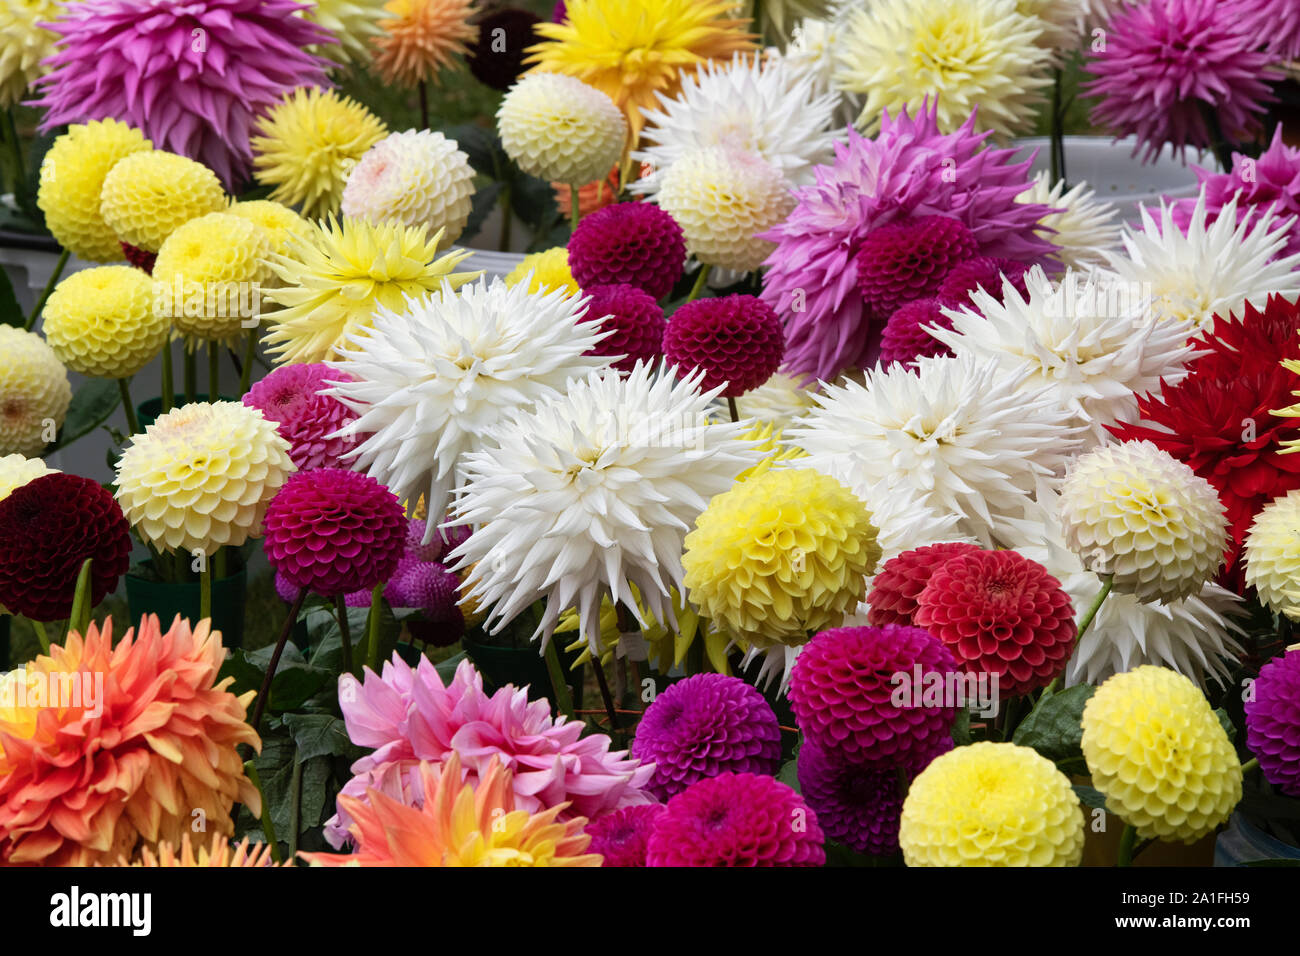 Dahlia flowers outside a judging tent at RHS Wisley Flower show, Surrey, England Stock Photo